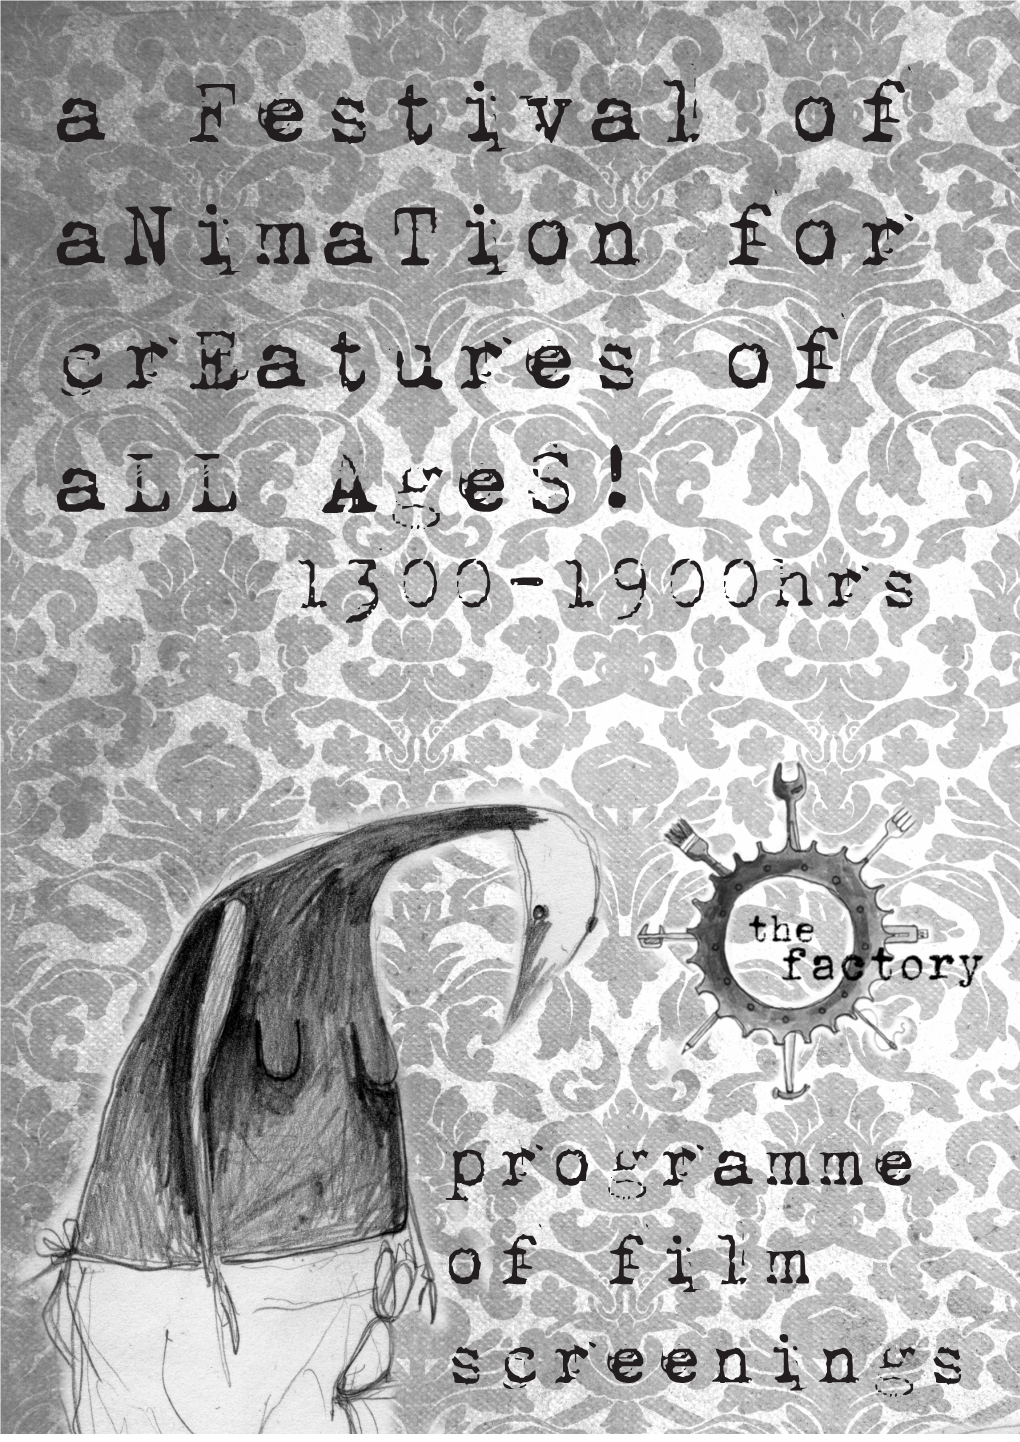 A Festival of Animation for Creatures of All Ages! 1300-1900Hrs